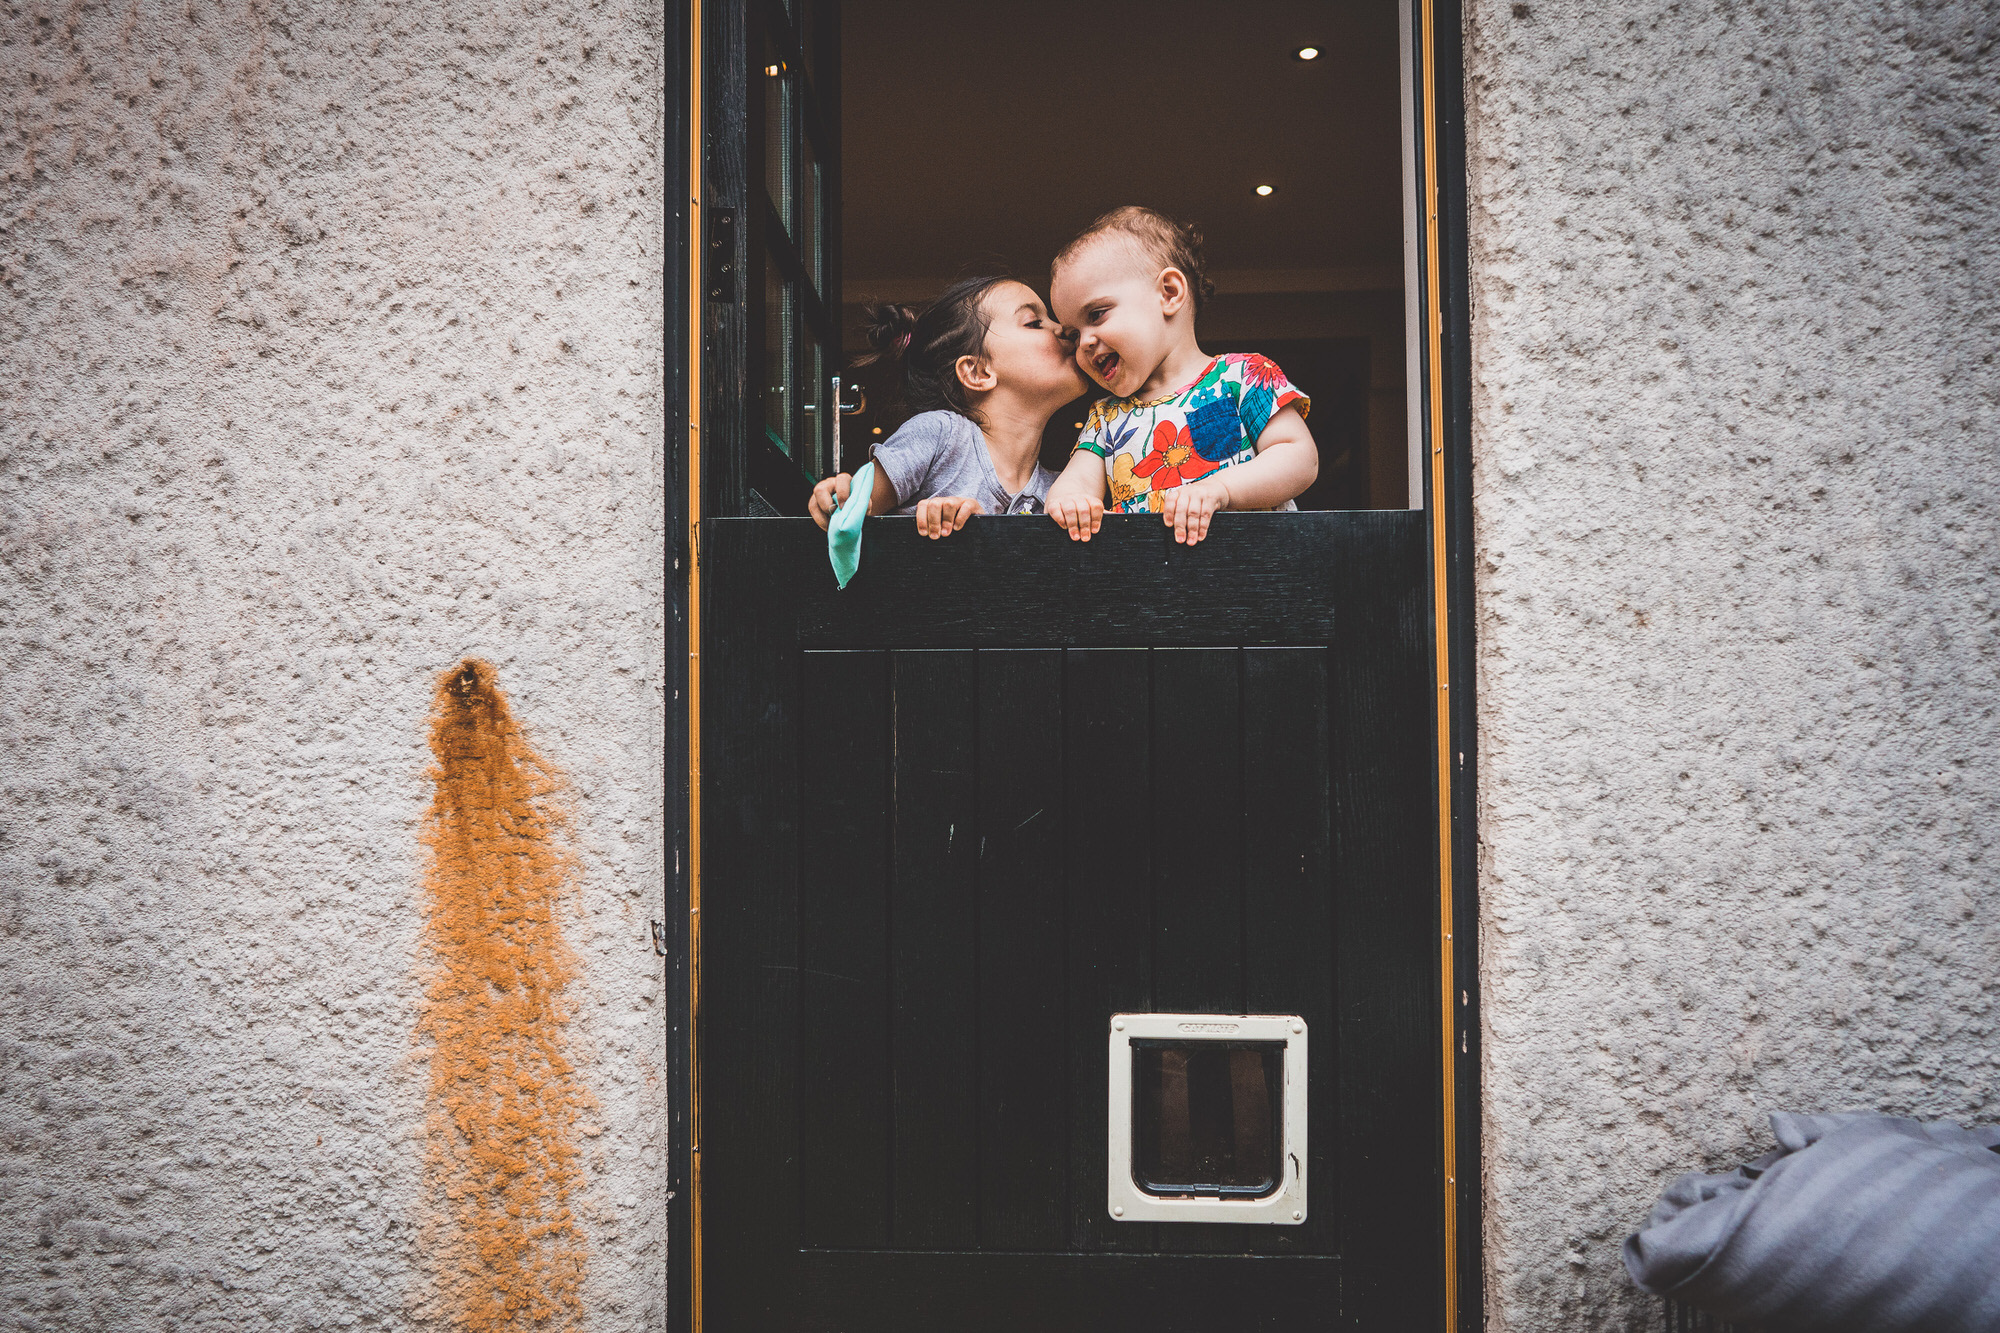 Wedding photographer captures a heartwarming moment of two children kissing joyfully on the big day.